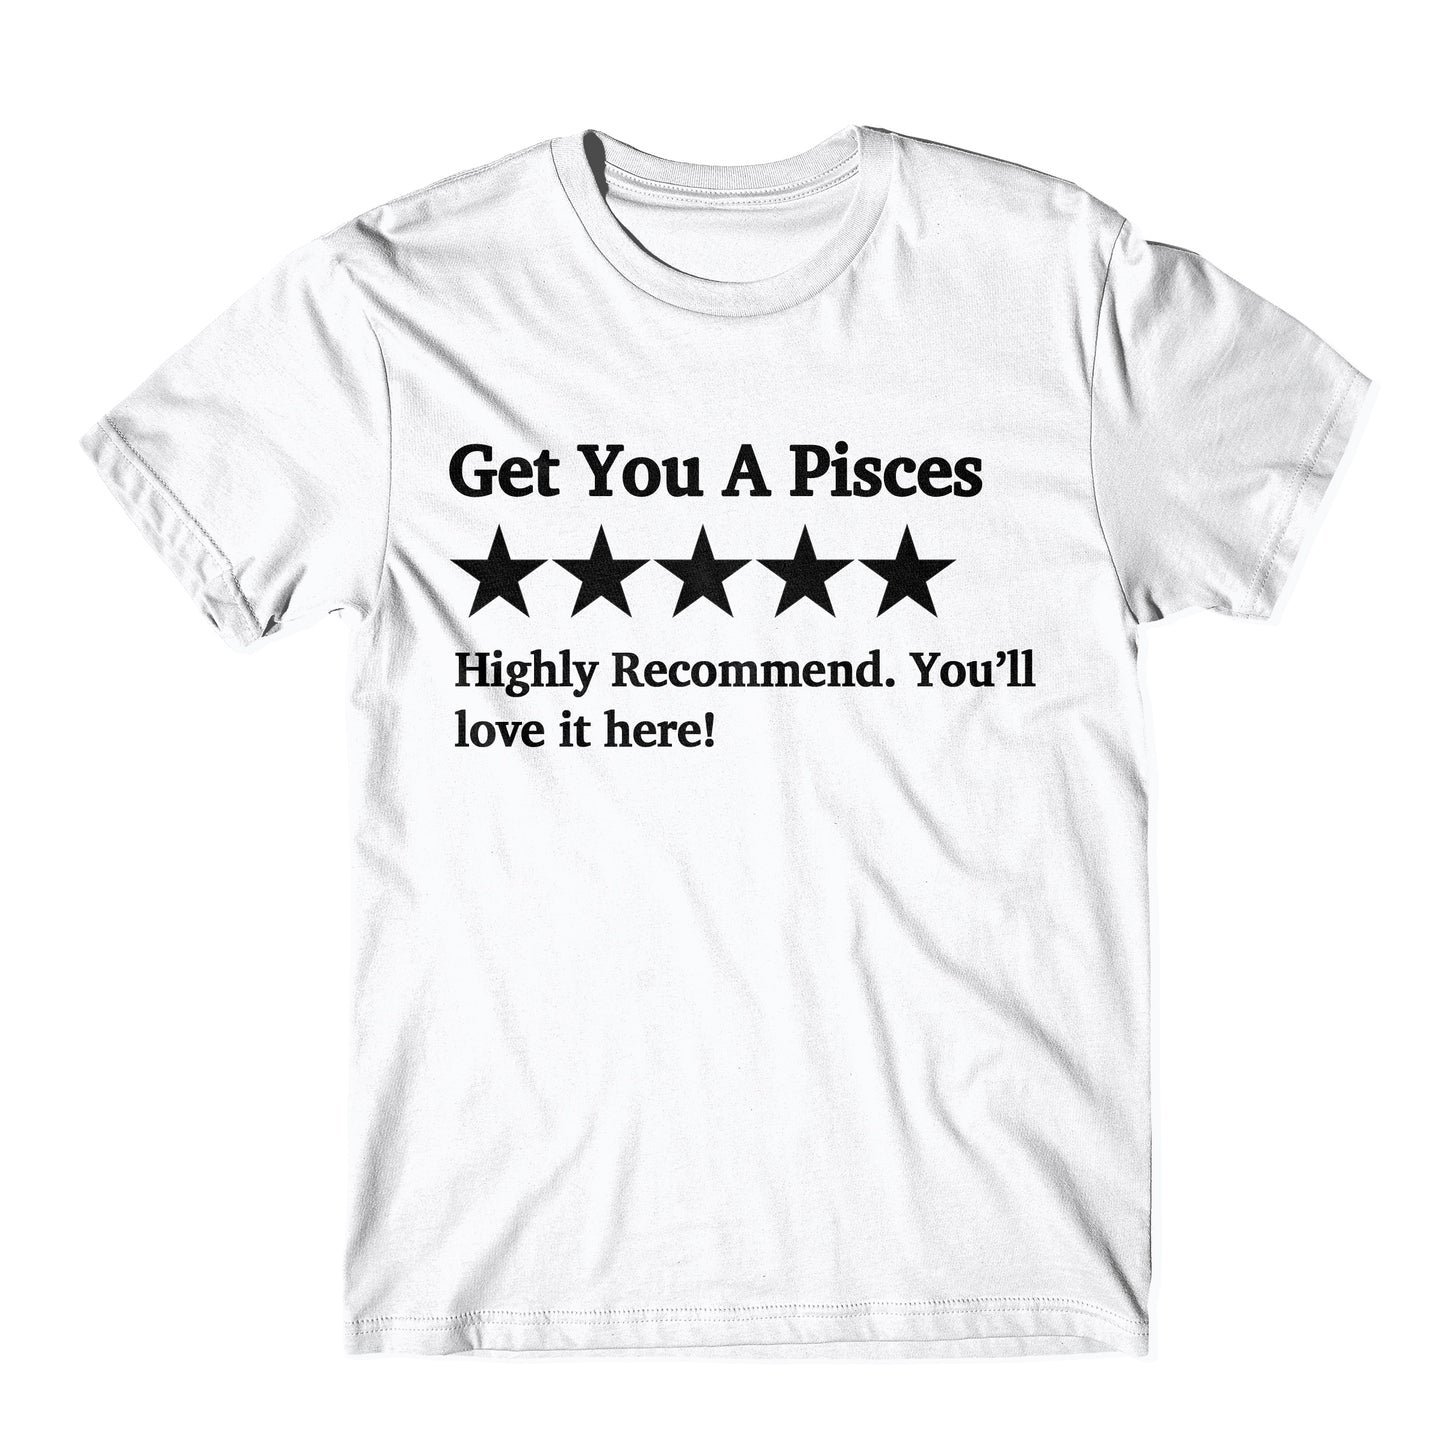 "Get You A Pisces Five Star Rating" Tee